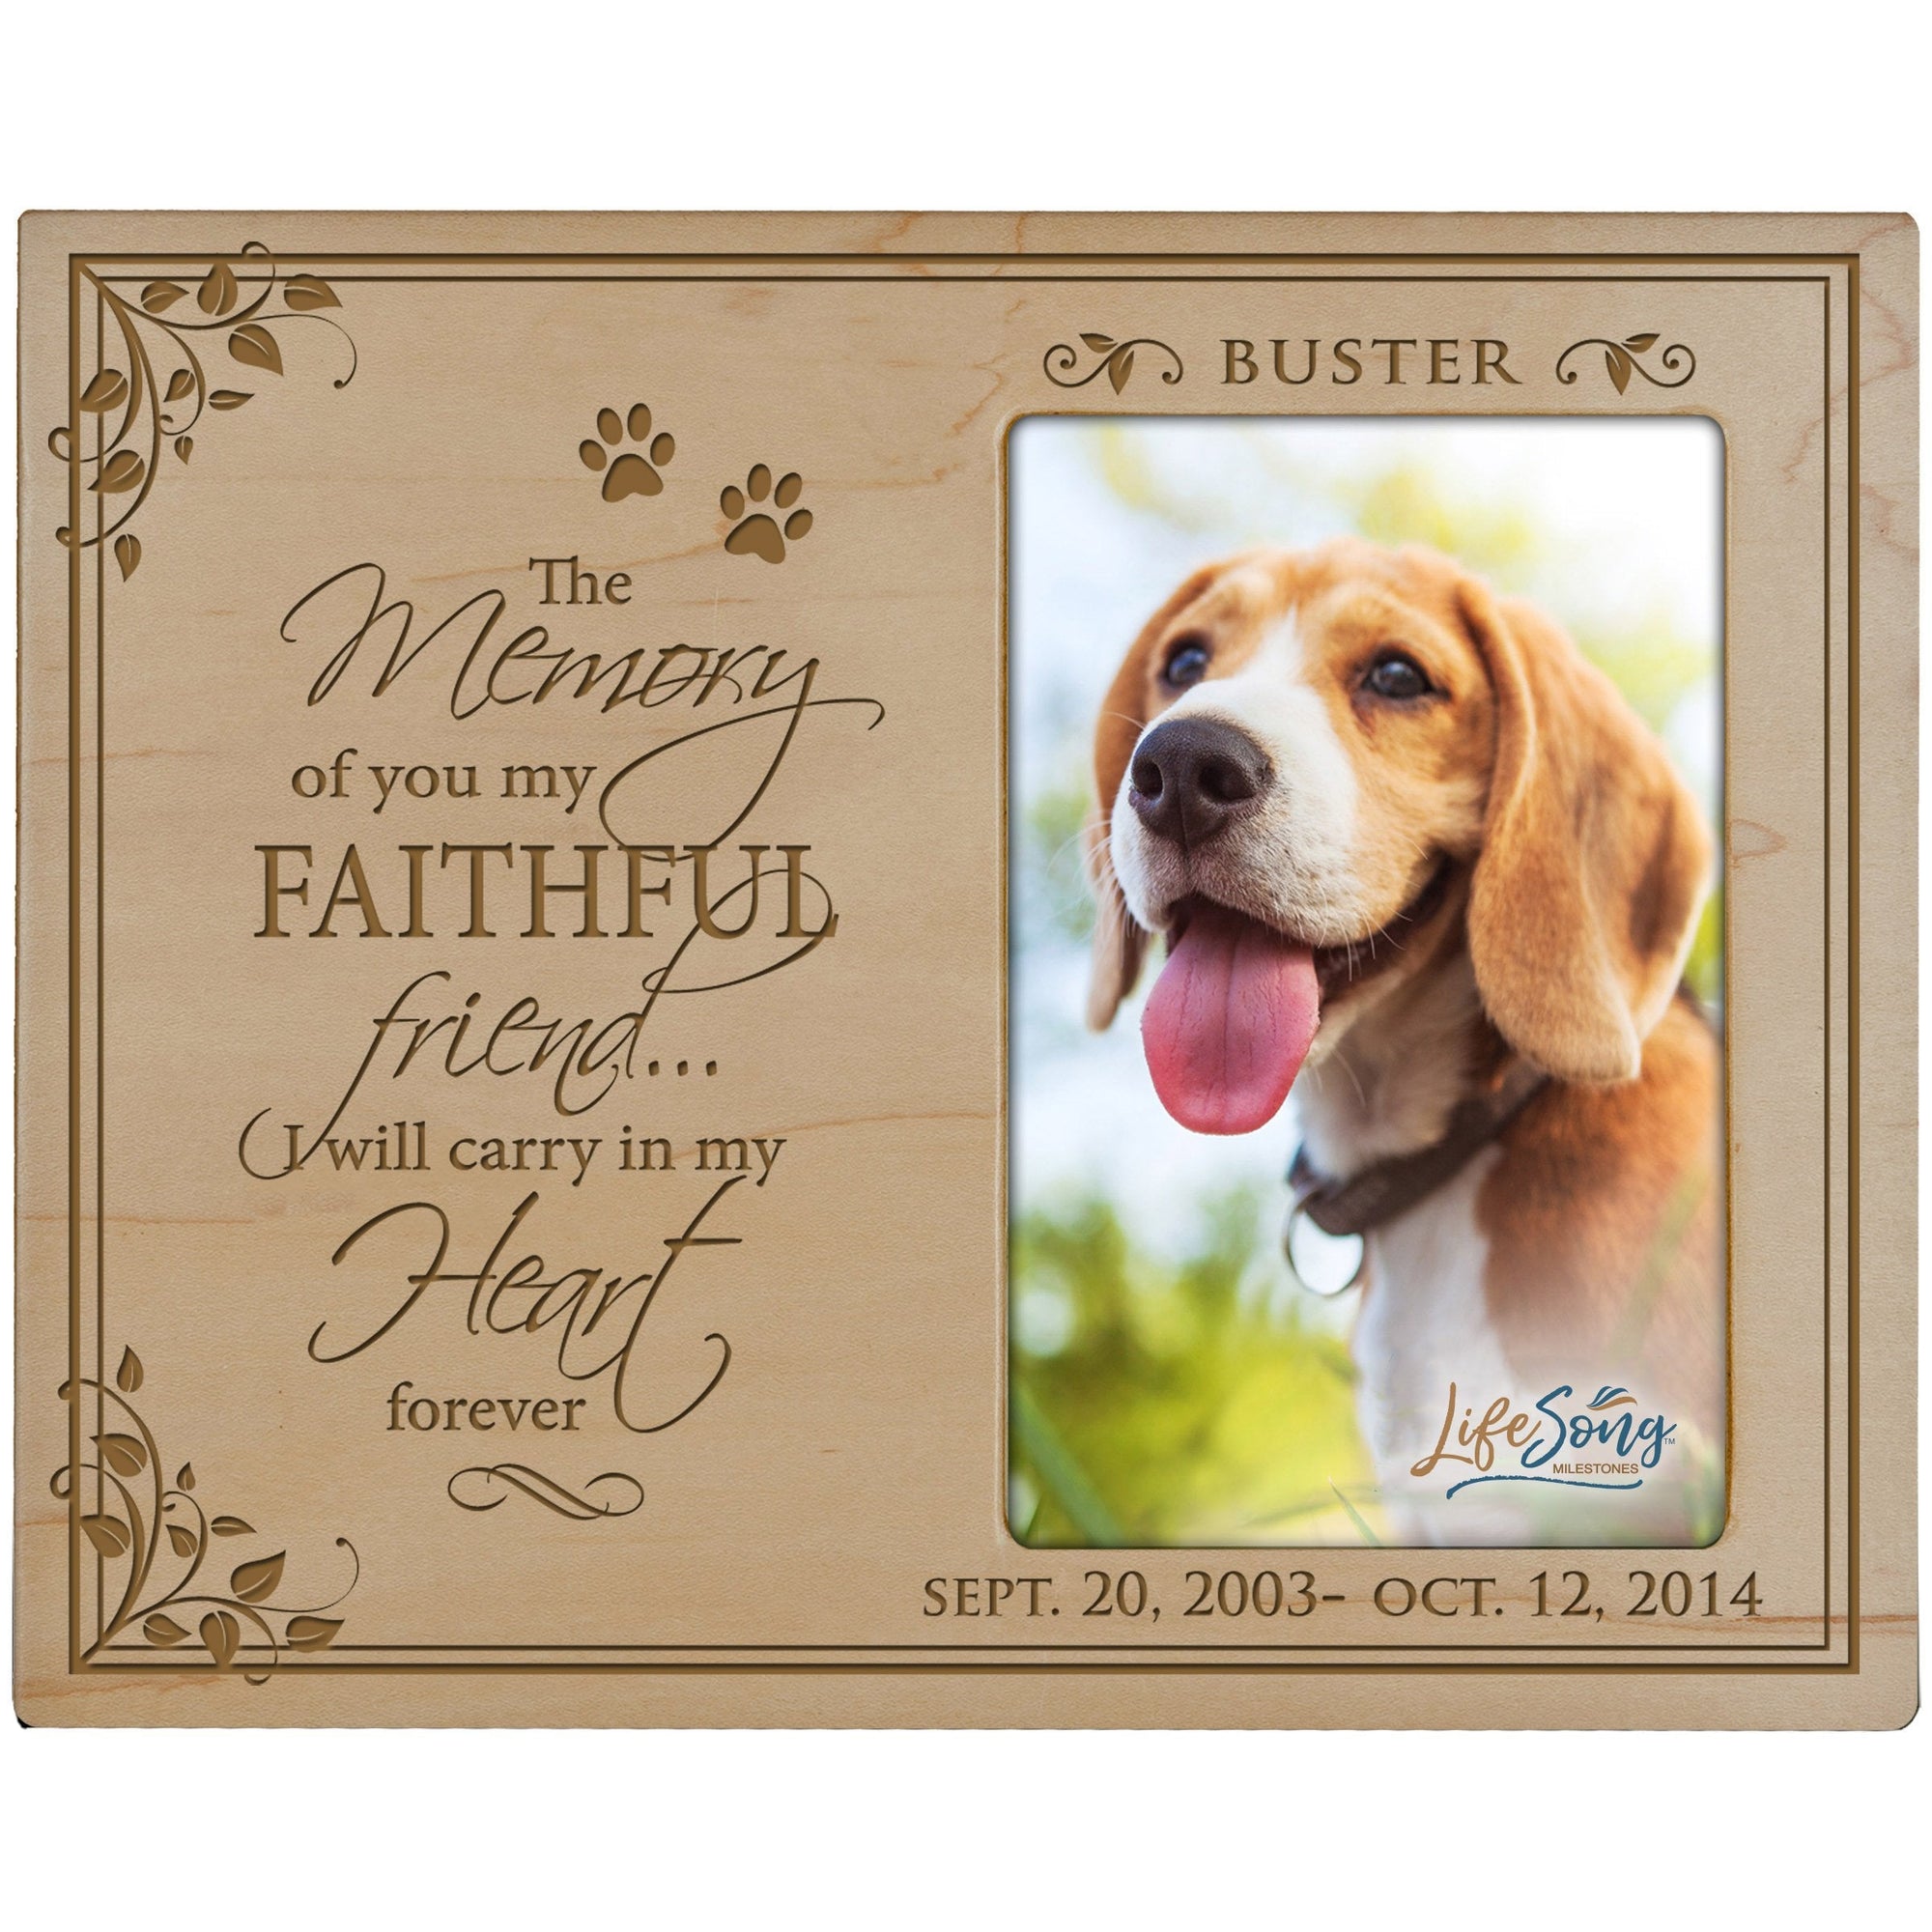 8x10 Maple Pet Memorial Picture Frame with the phrase "In Memory of You My Faithful Friend"